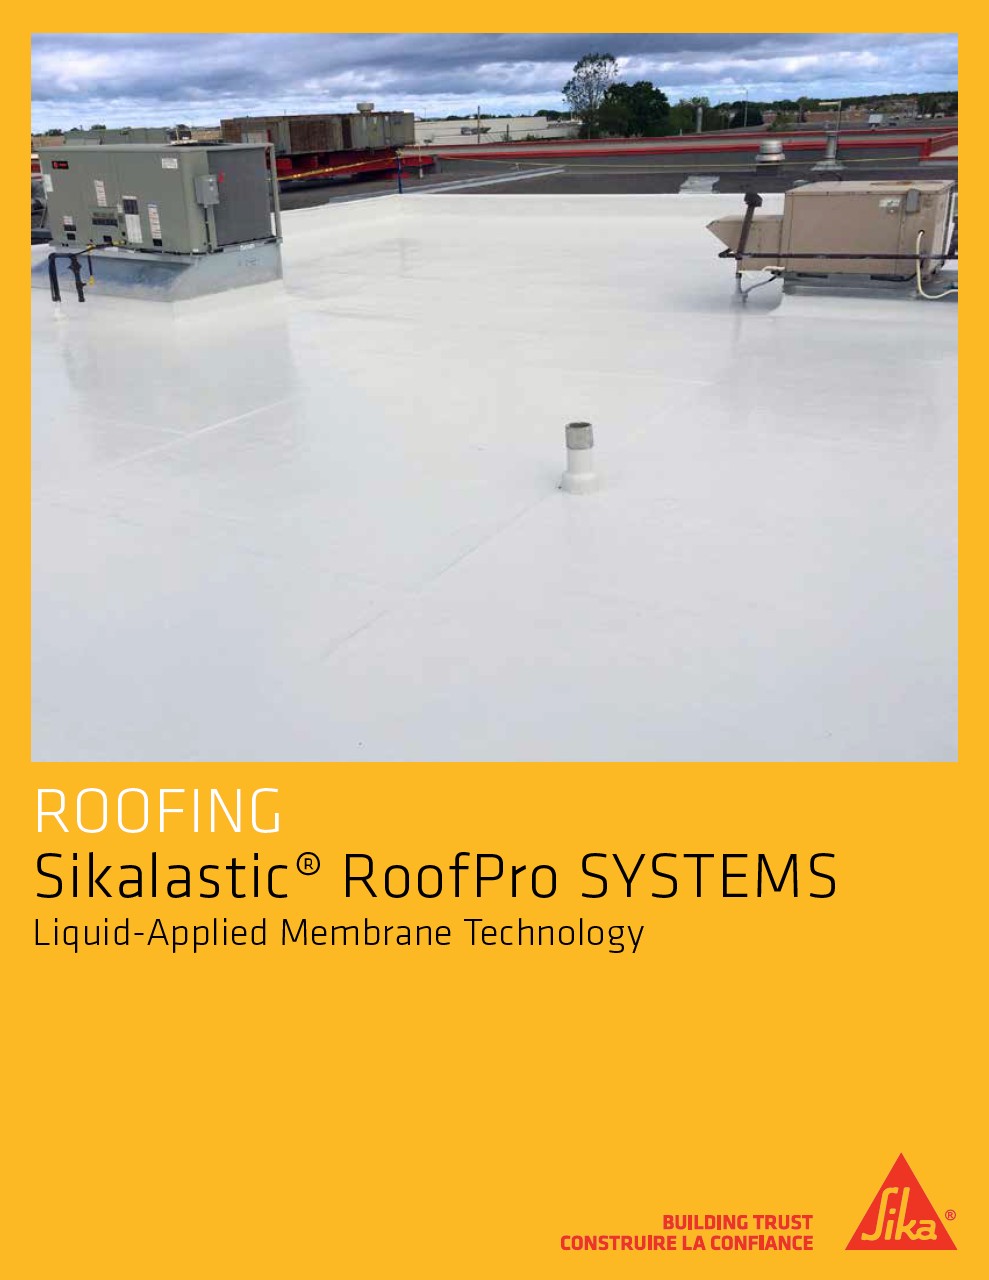   Sikalastic® RoofPro